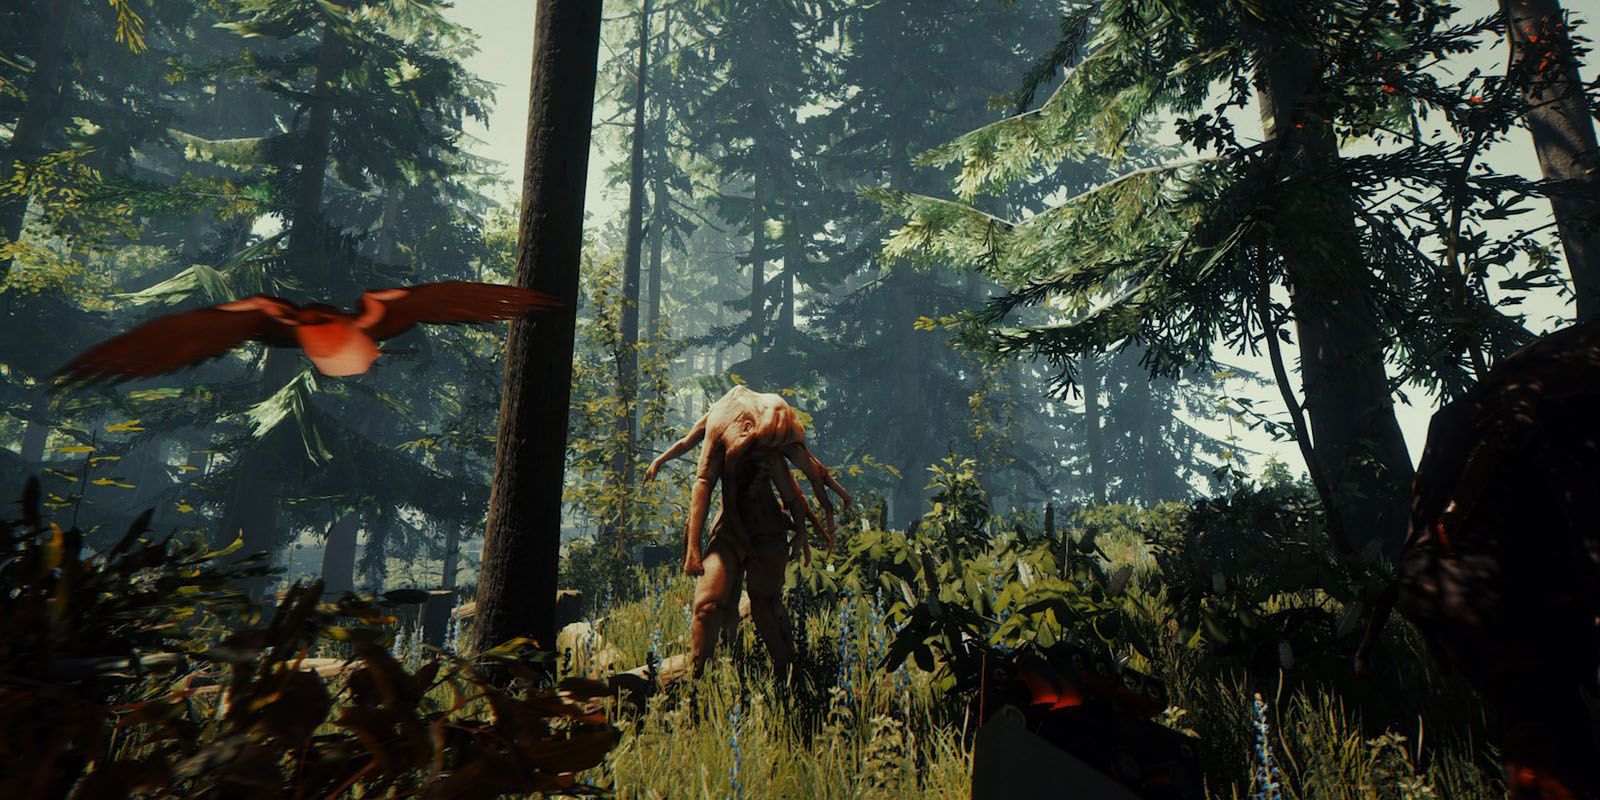 the forest creature mod download